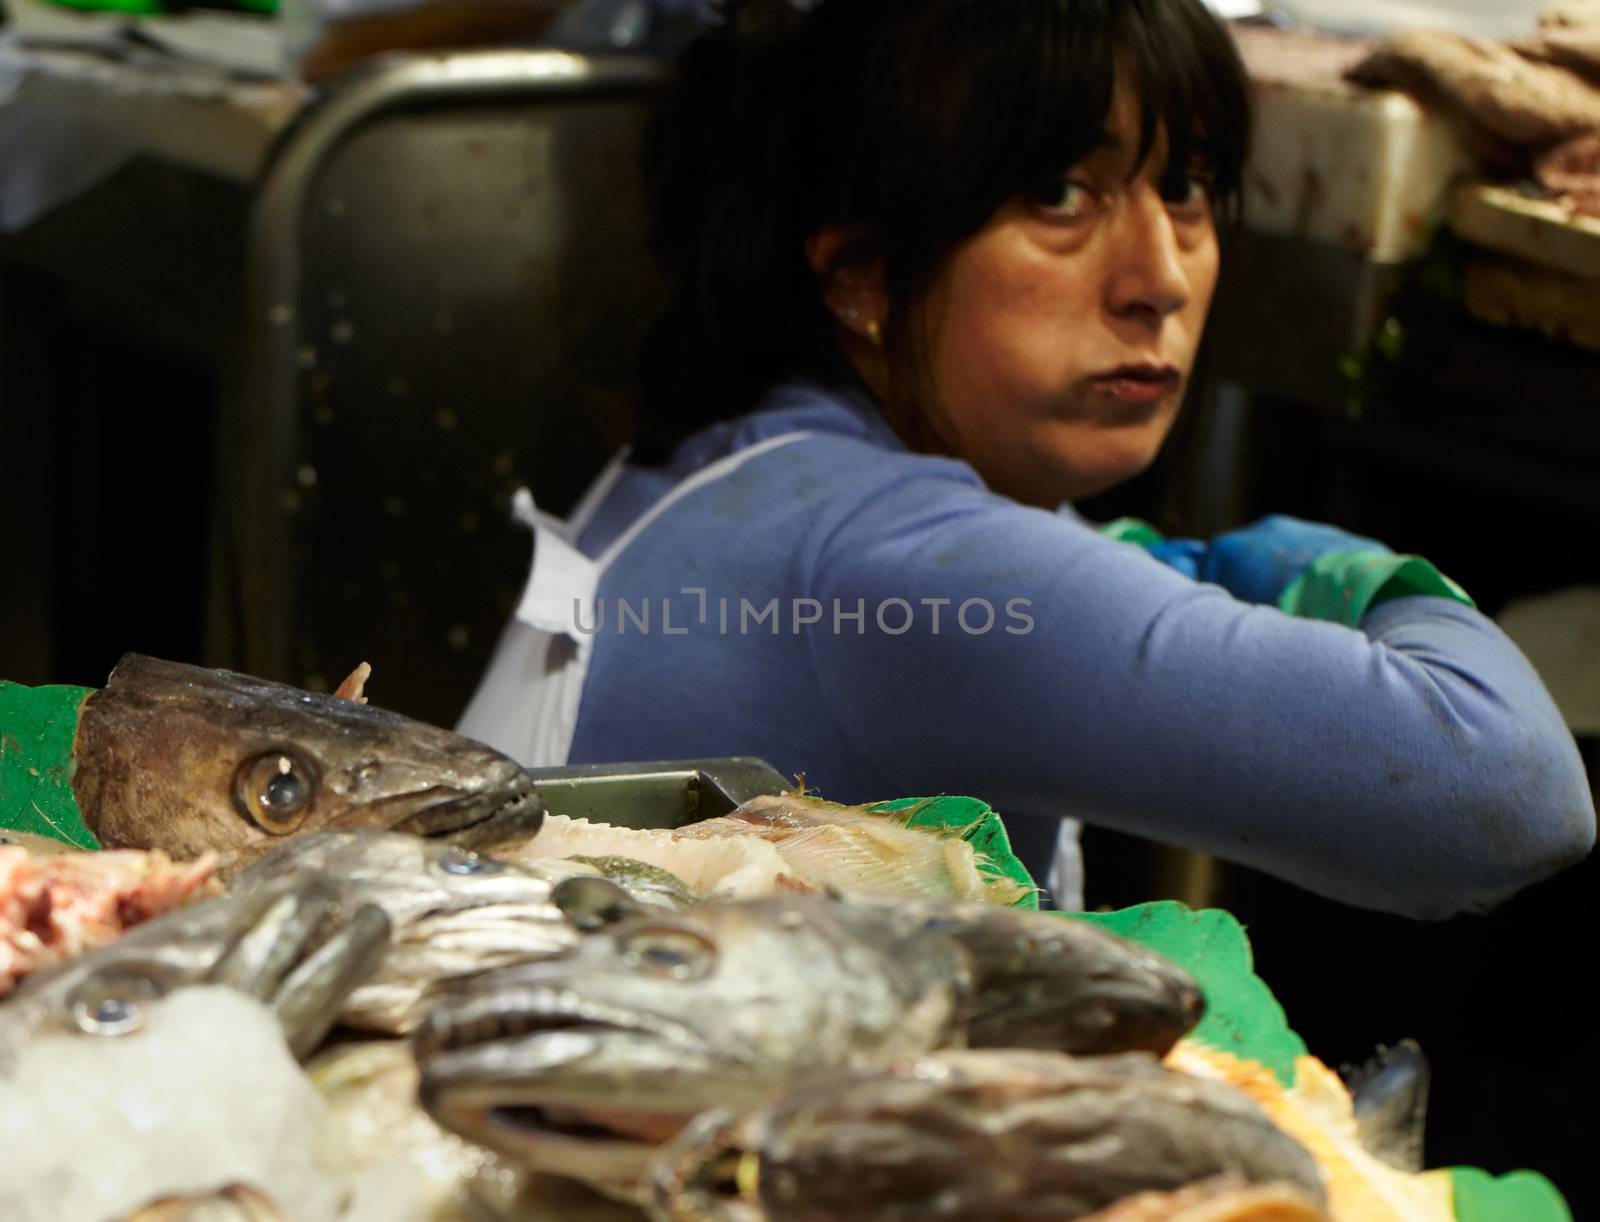 BARCELONA - MAY 26: The fish monger lady at the market, looking at the camera on May, 26, 2012 in Barcelona, Spain.